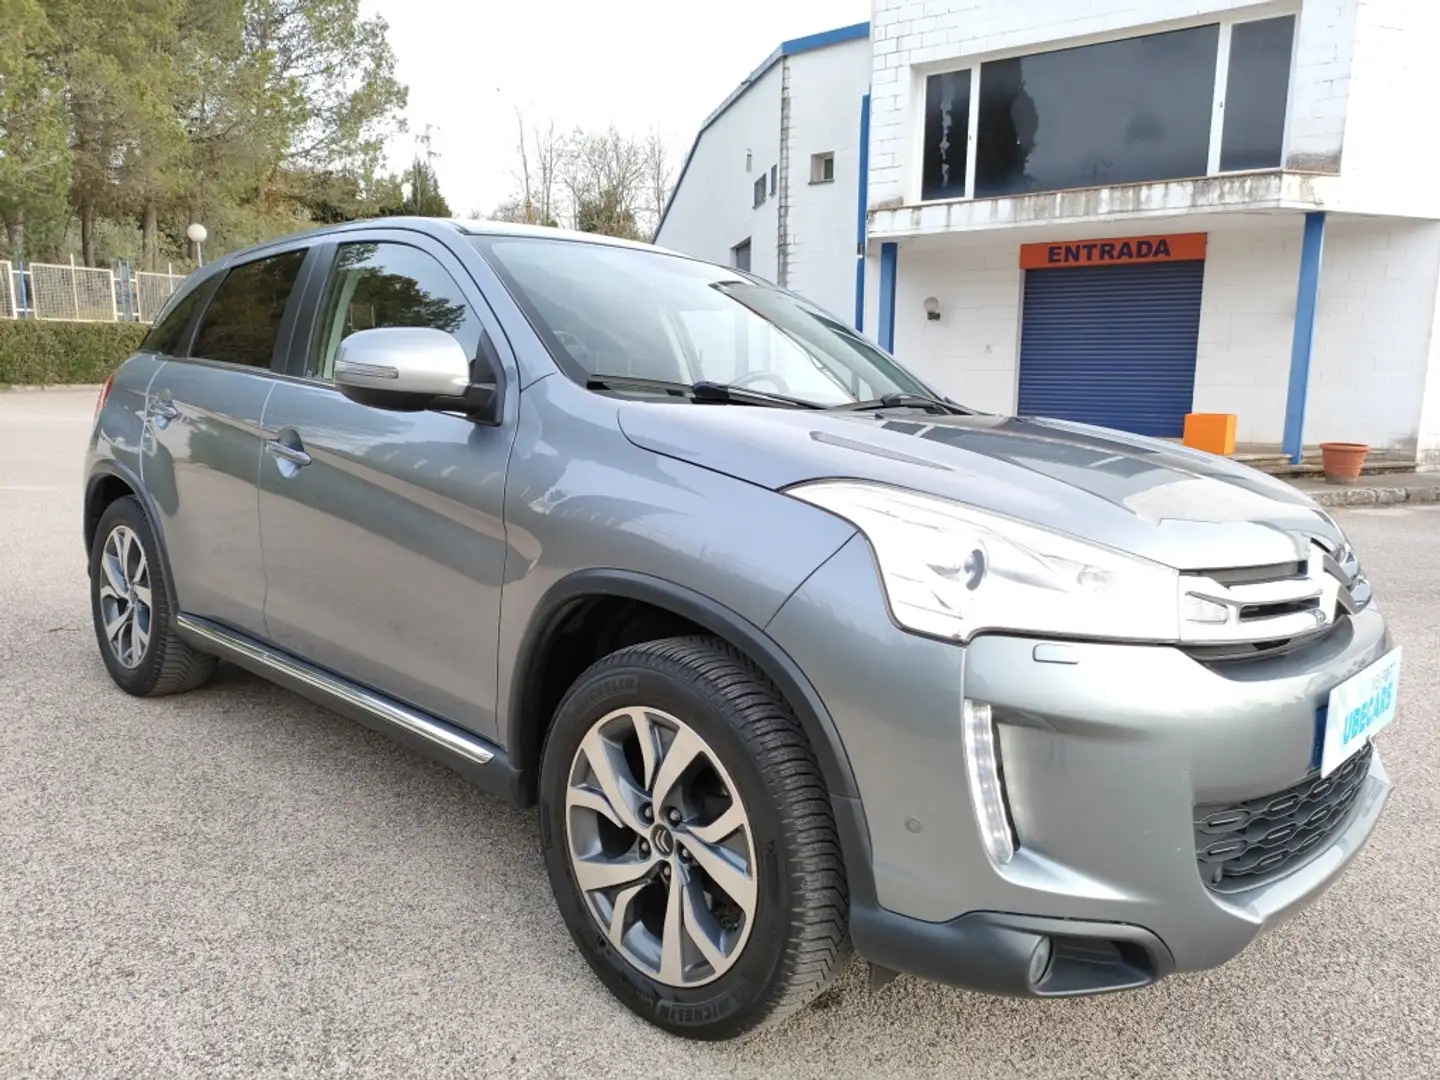 Citroen C4 Aircross 1.6HDI S&S Exclusive 4WD 115 Gri - 2